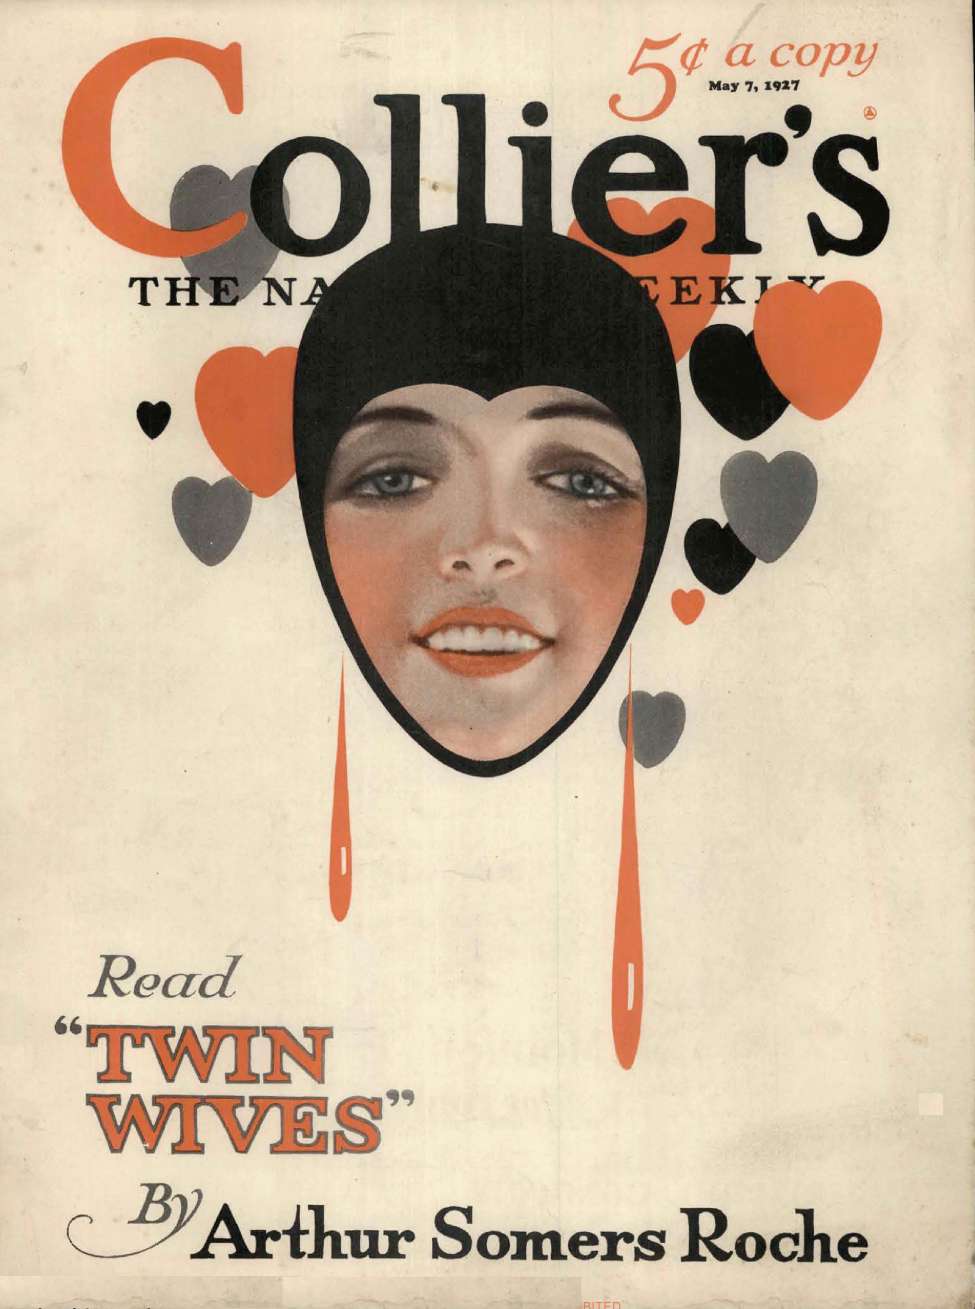 Comic Book Cover For Collier's Weekly v79 19